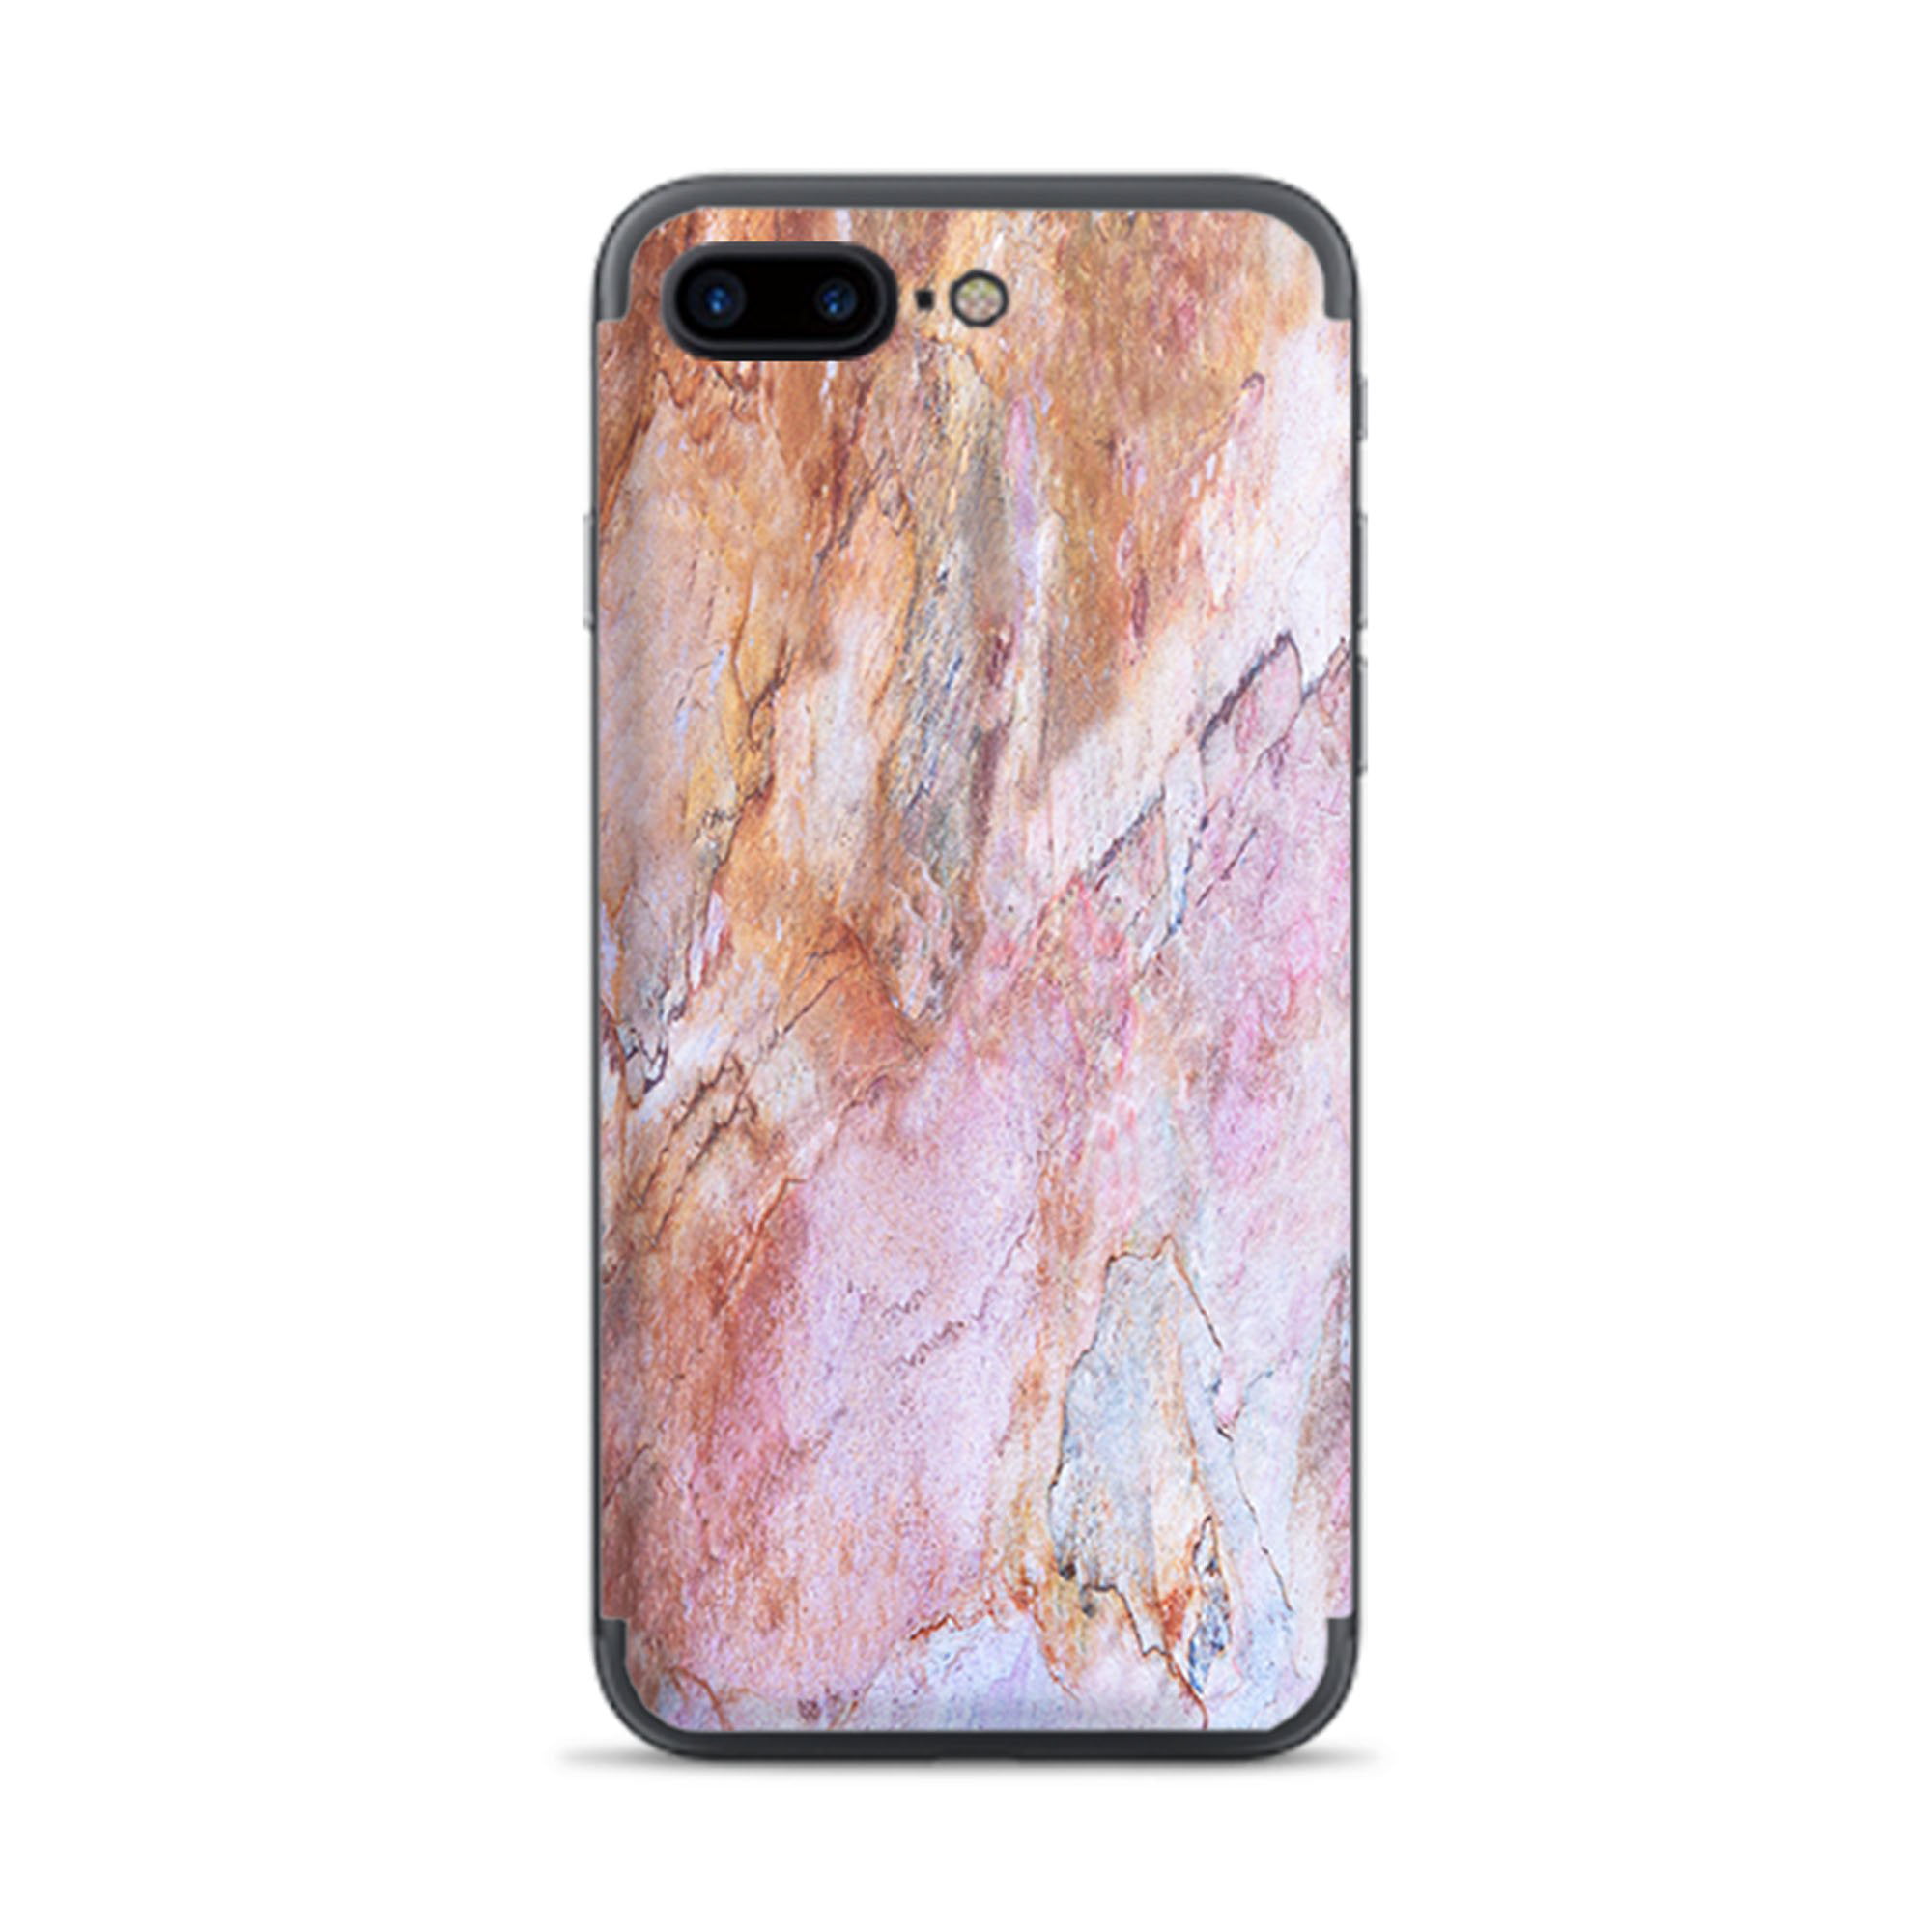 Apple iPhone 8 Plus Skin - Rose Gold Marble - Sticker Decal Wrap